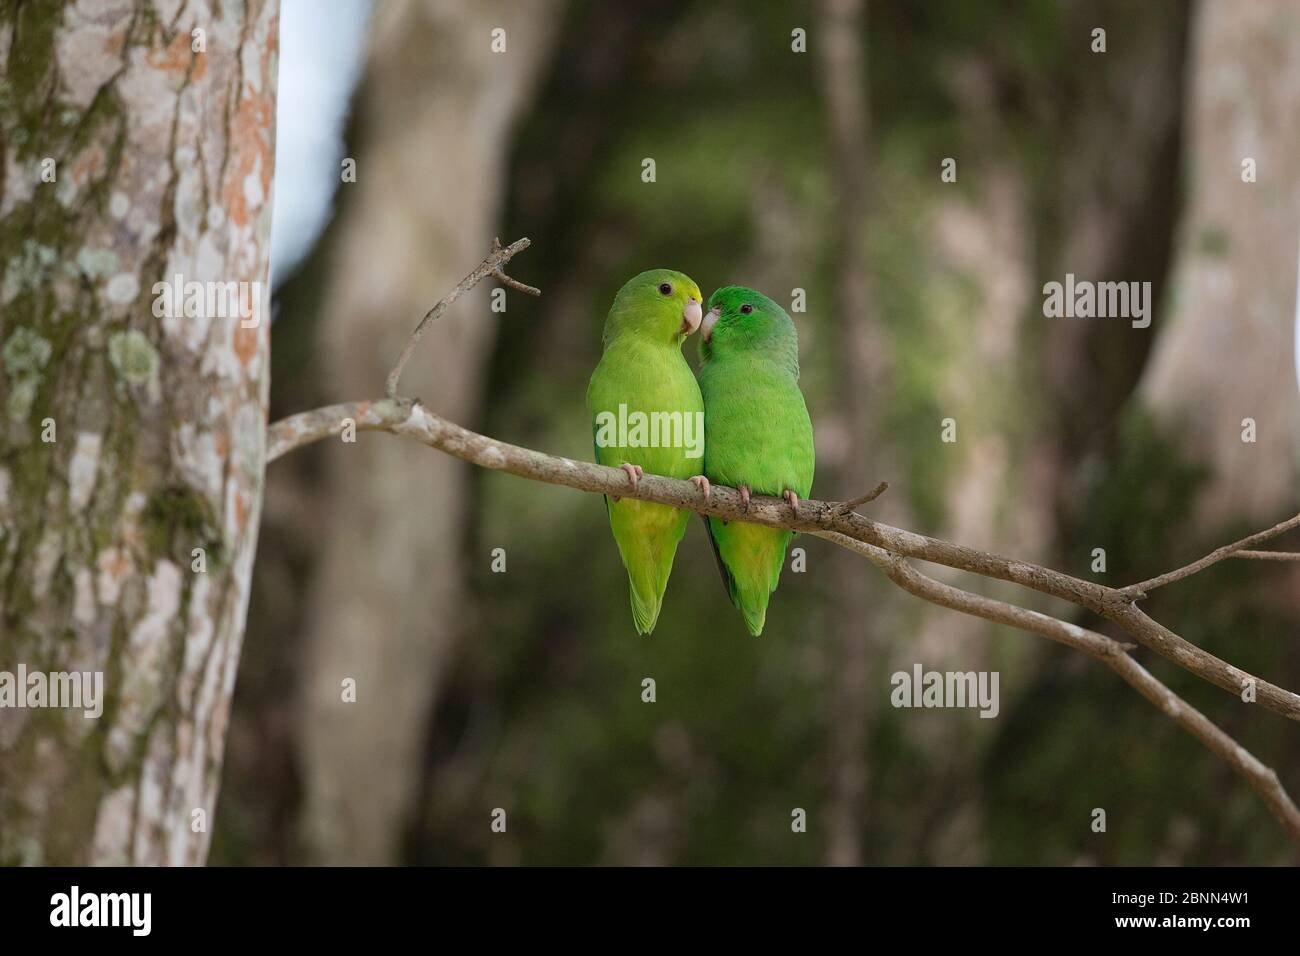 Green-rumped parrotlet (Forpus passerinus) two sitting together, Trinidad and Tobago, April Stock Photo